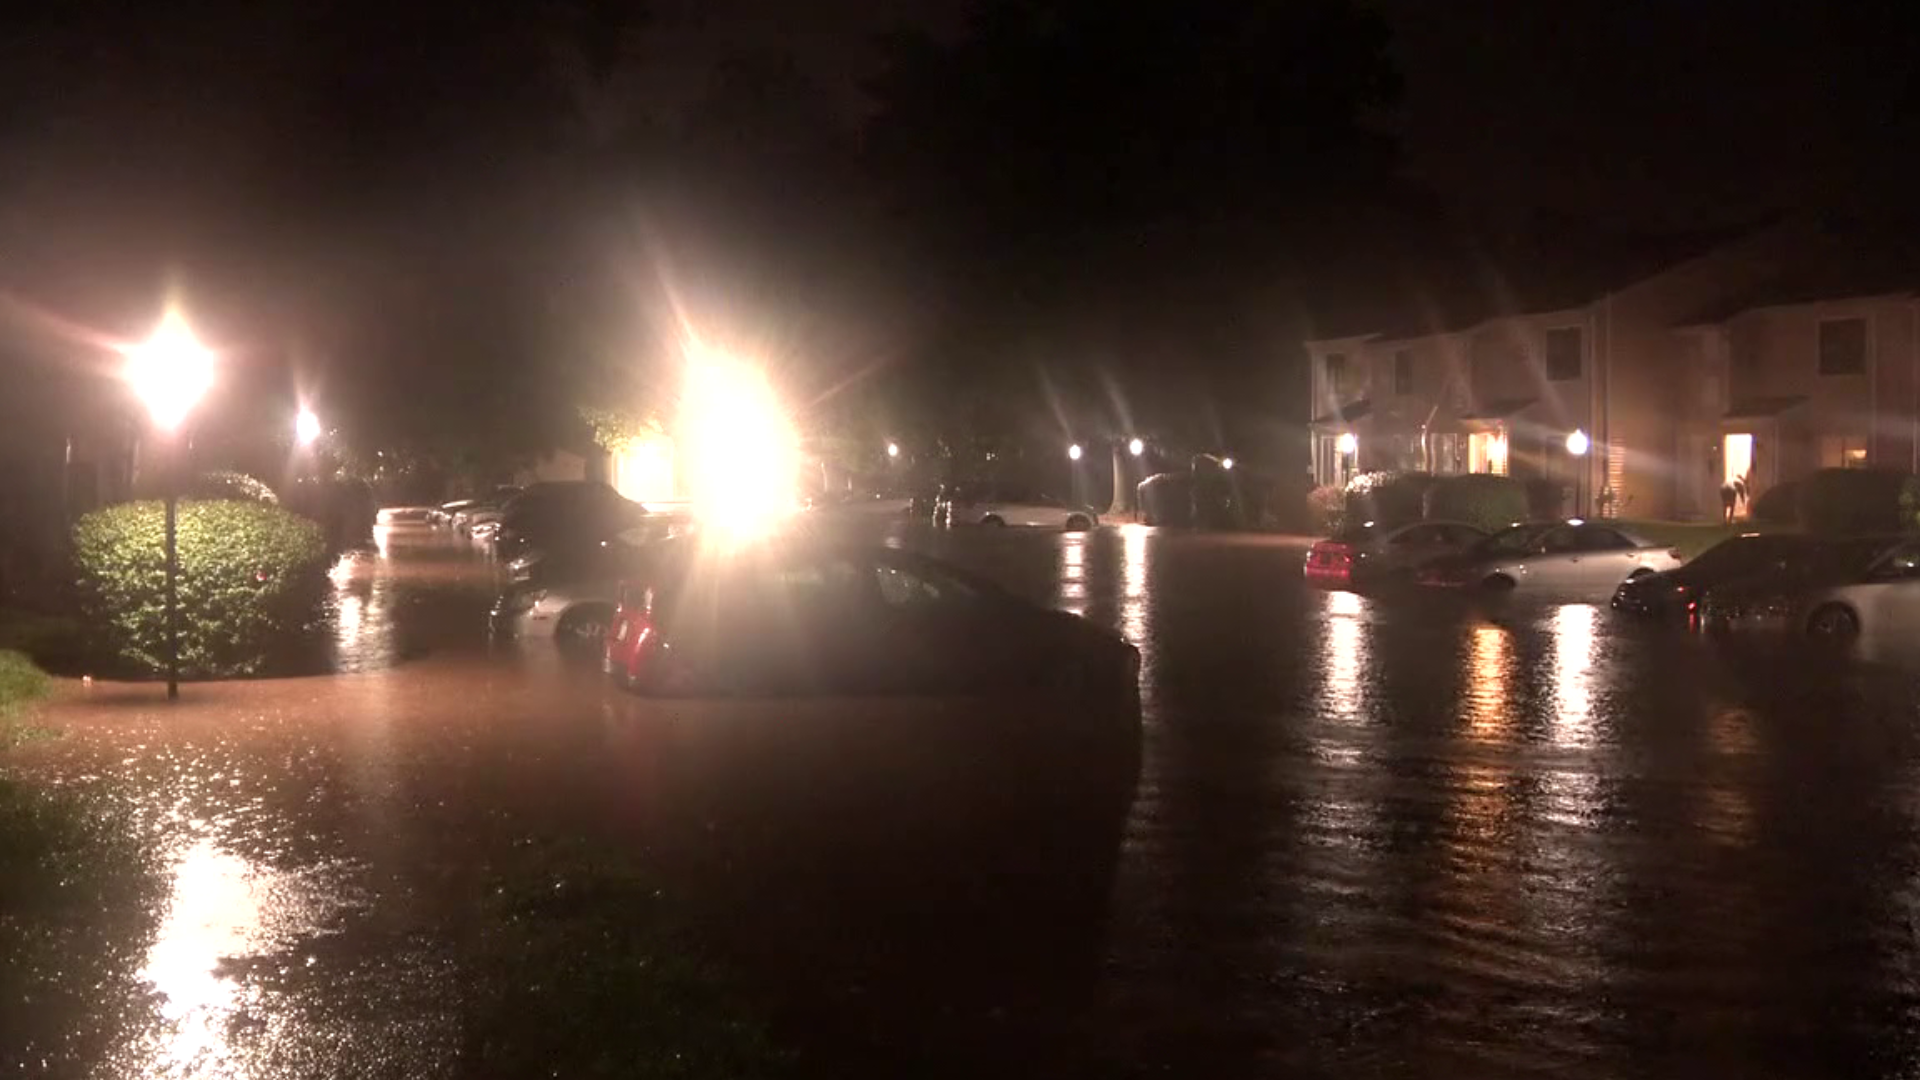 If you live in Monroe County and Tropical Storm Henri caused flood damage to your property, emergency management officials want to hear from you.